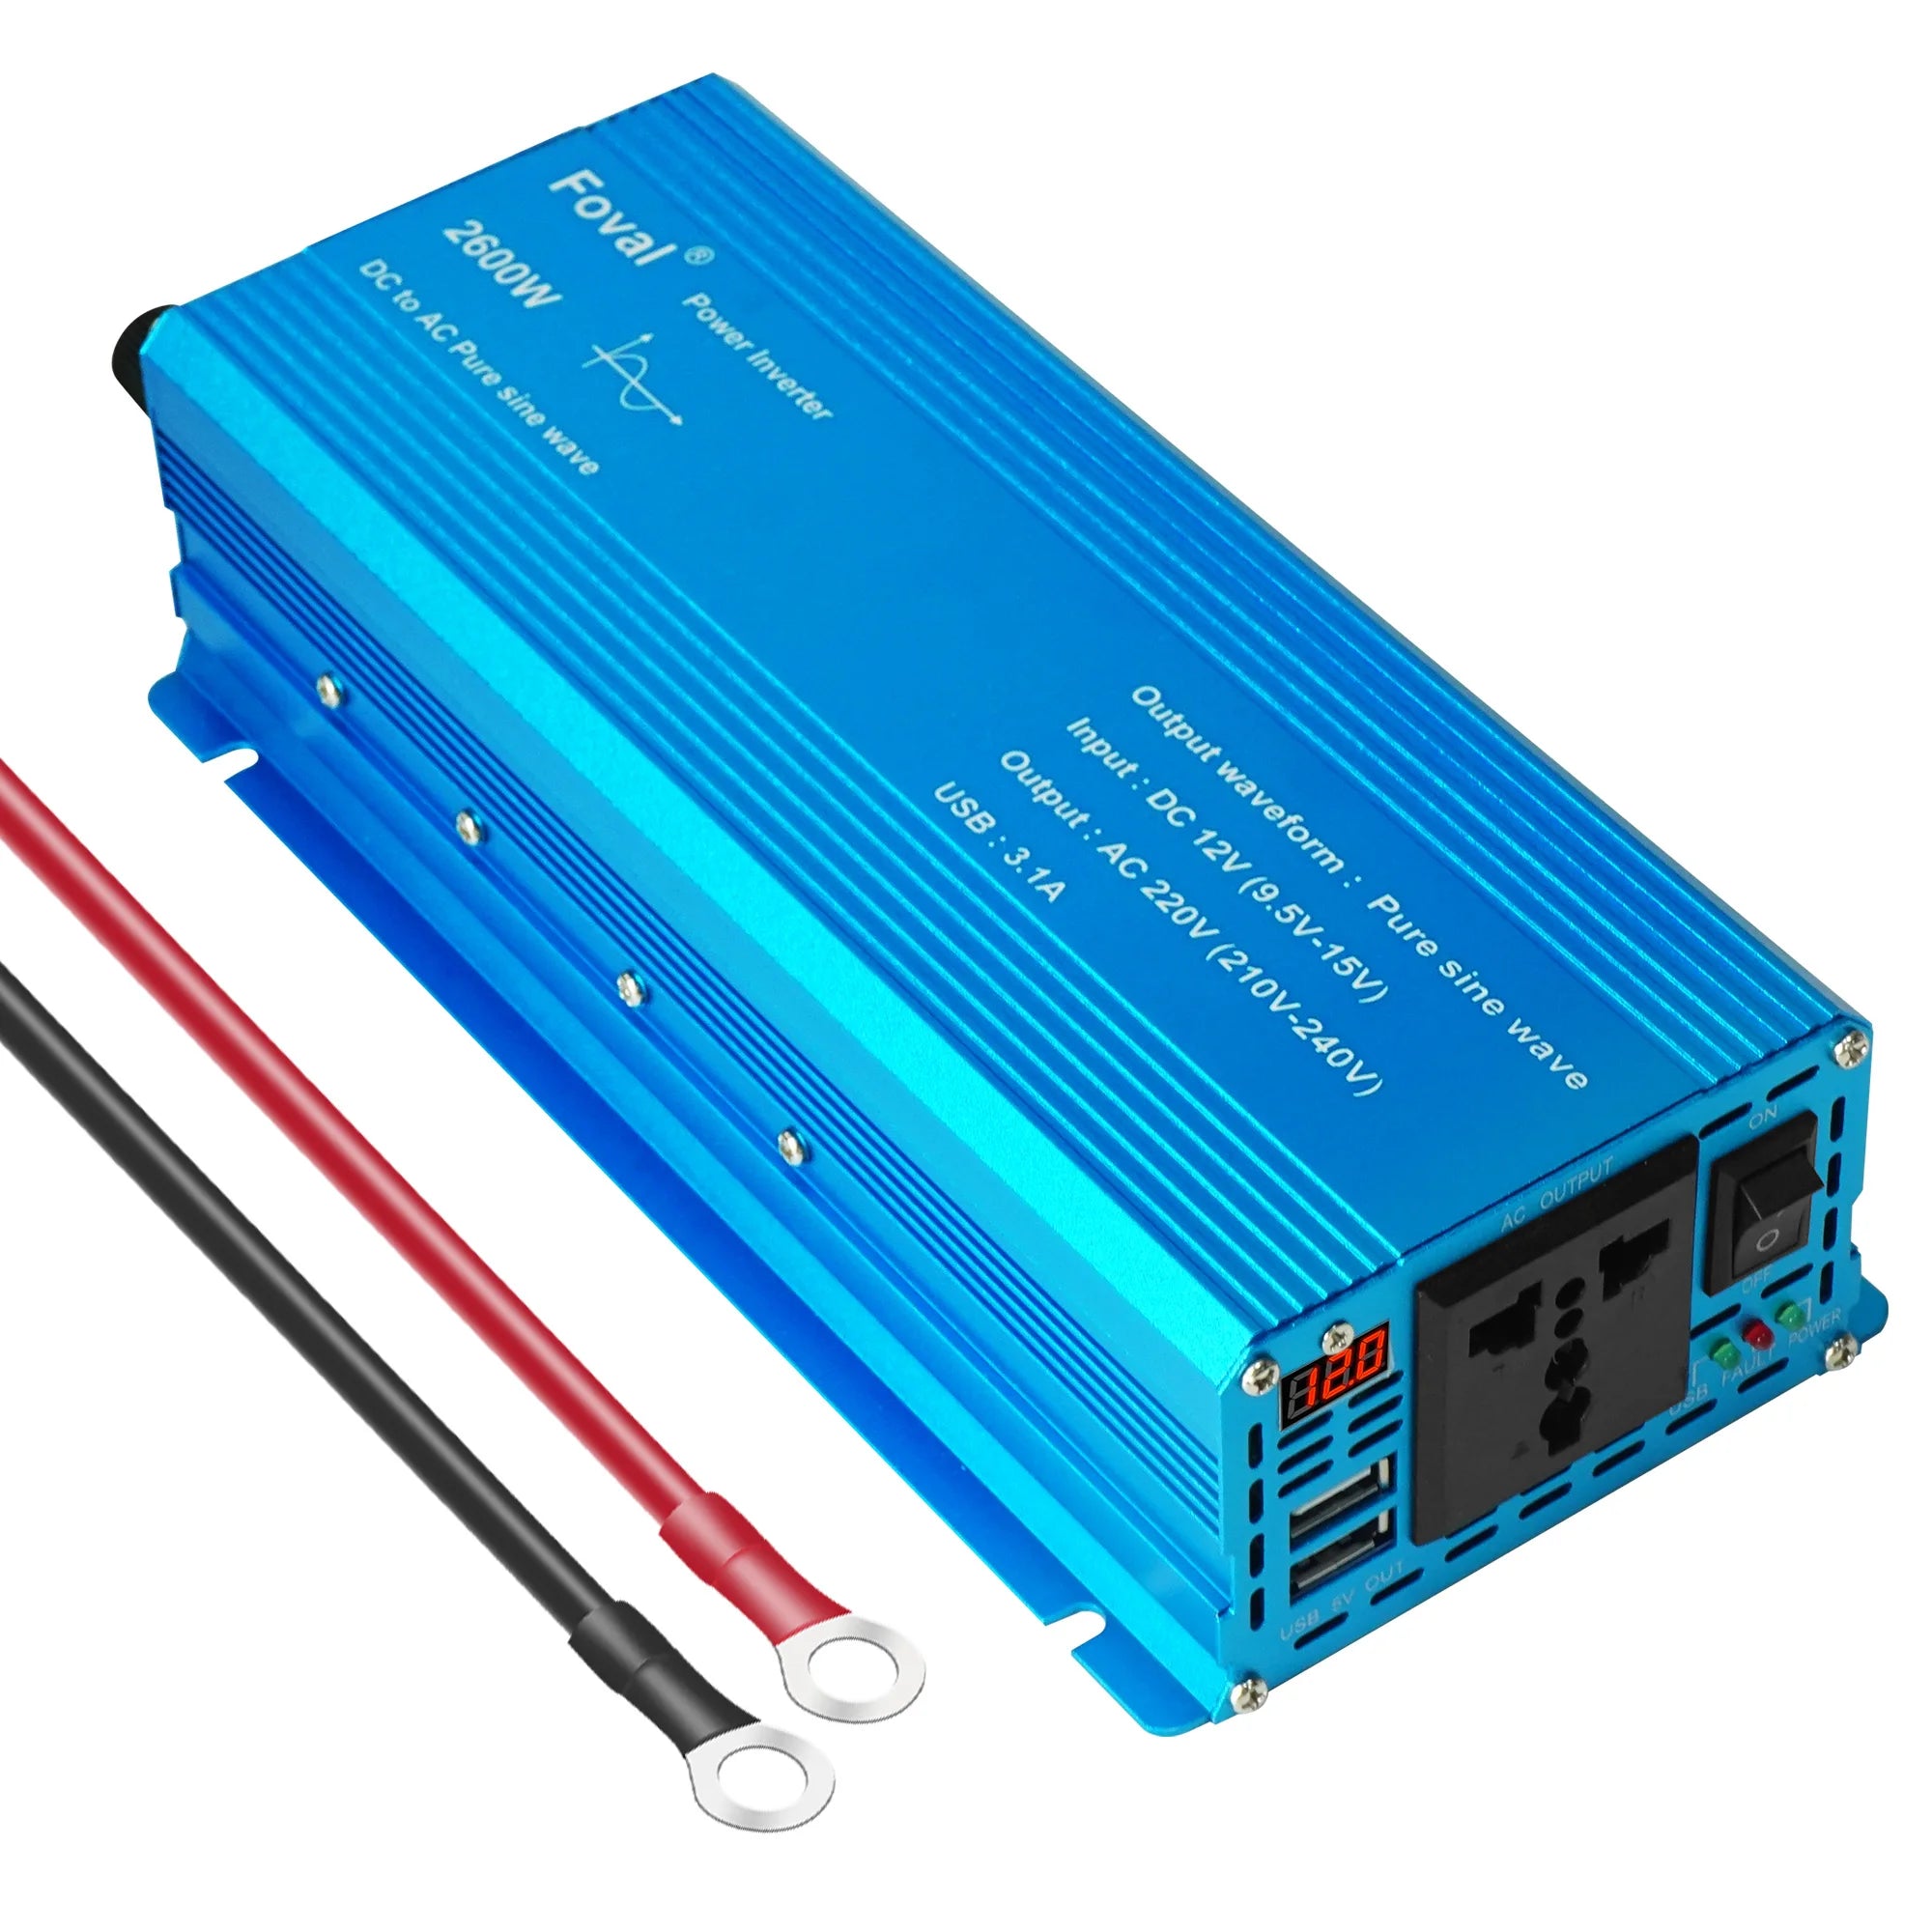 DC 12V to AC 220V Pure Sine Wave Inverter, Insufficient contact surface on alligator clips for high-power applications.